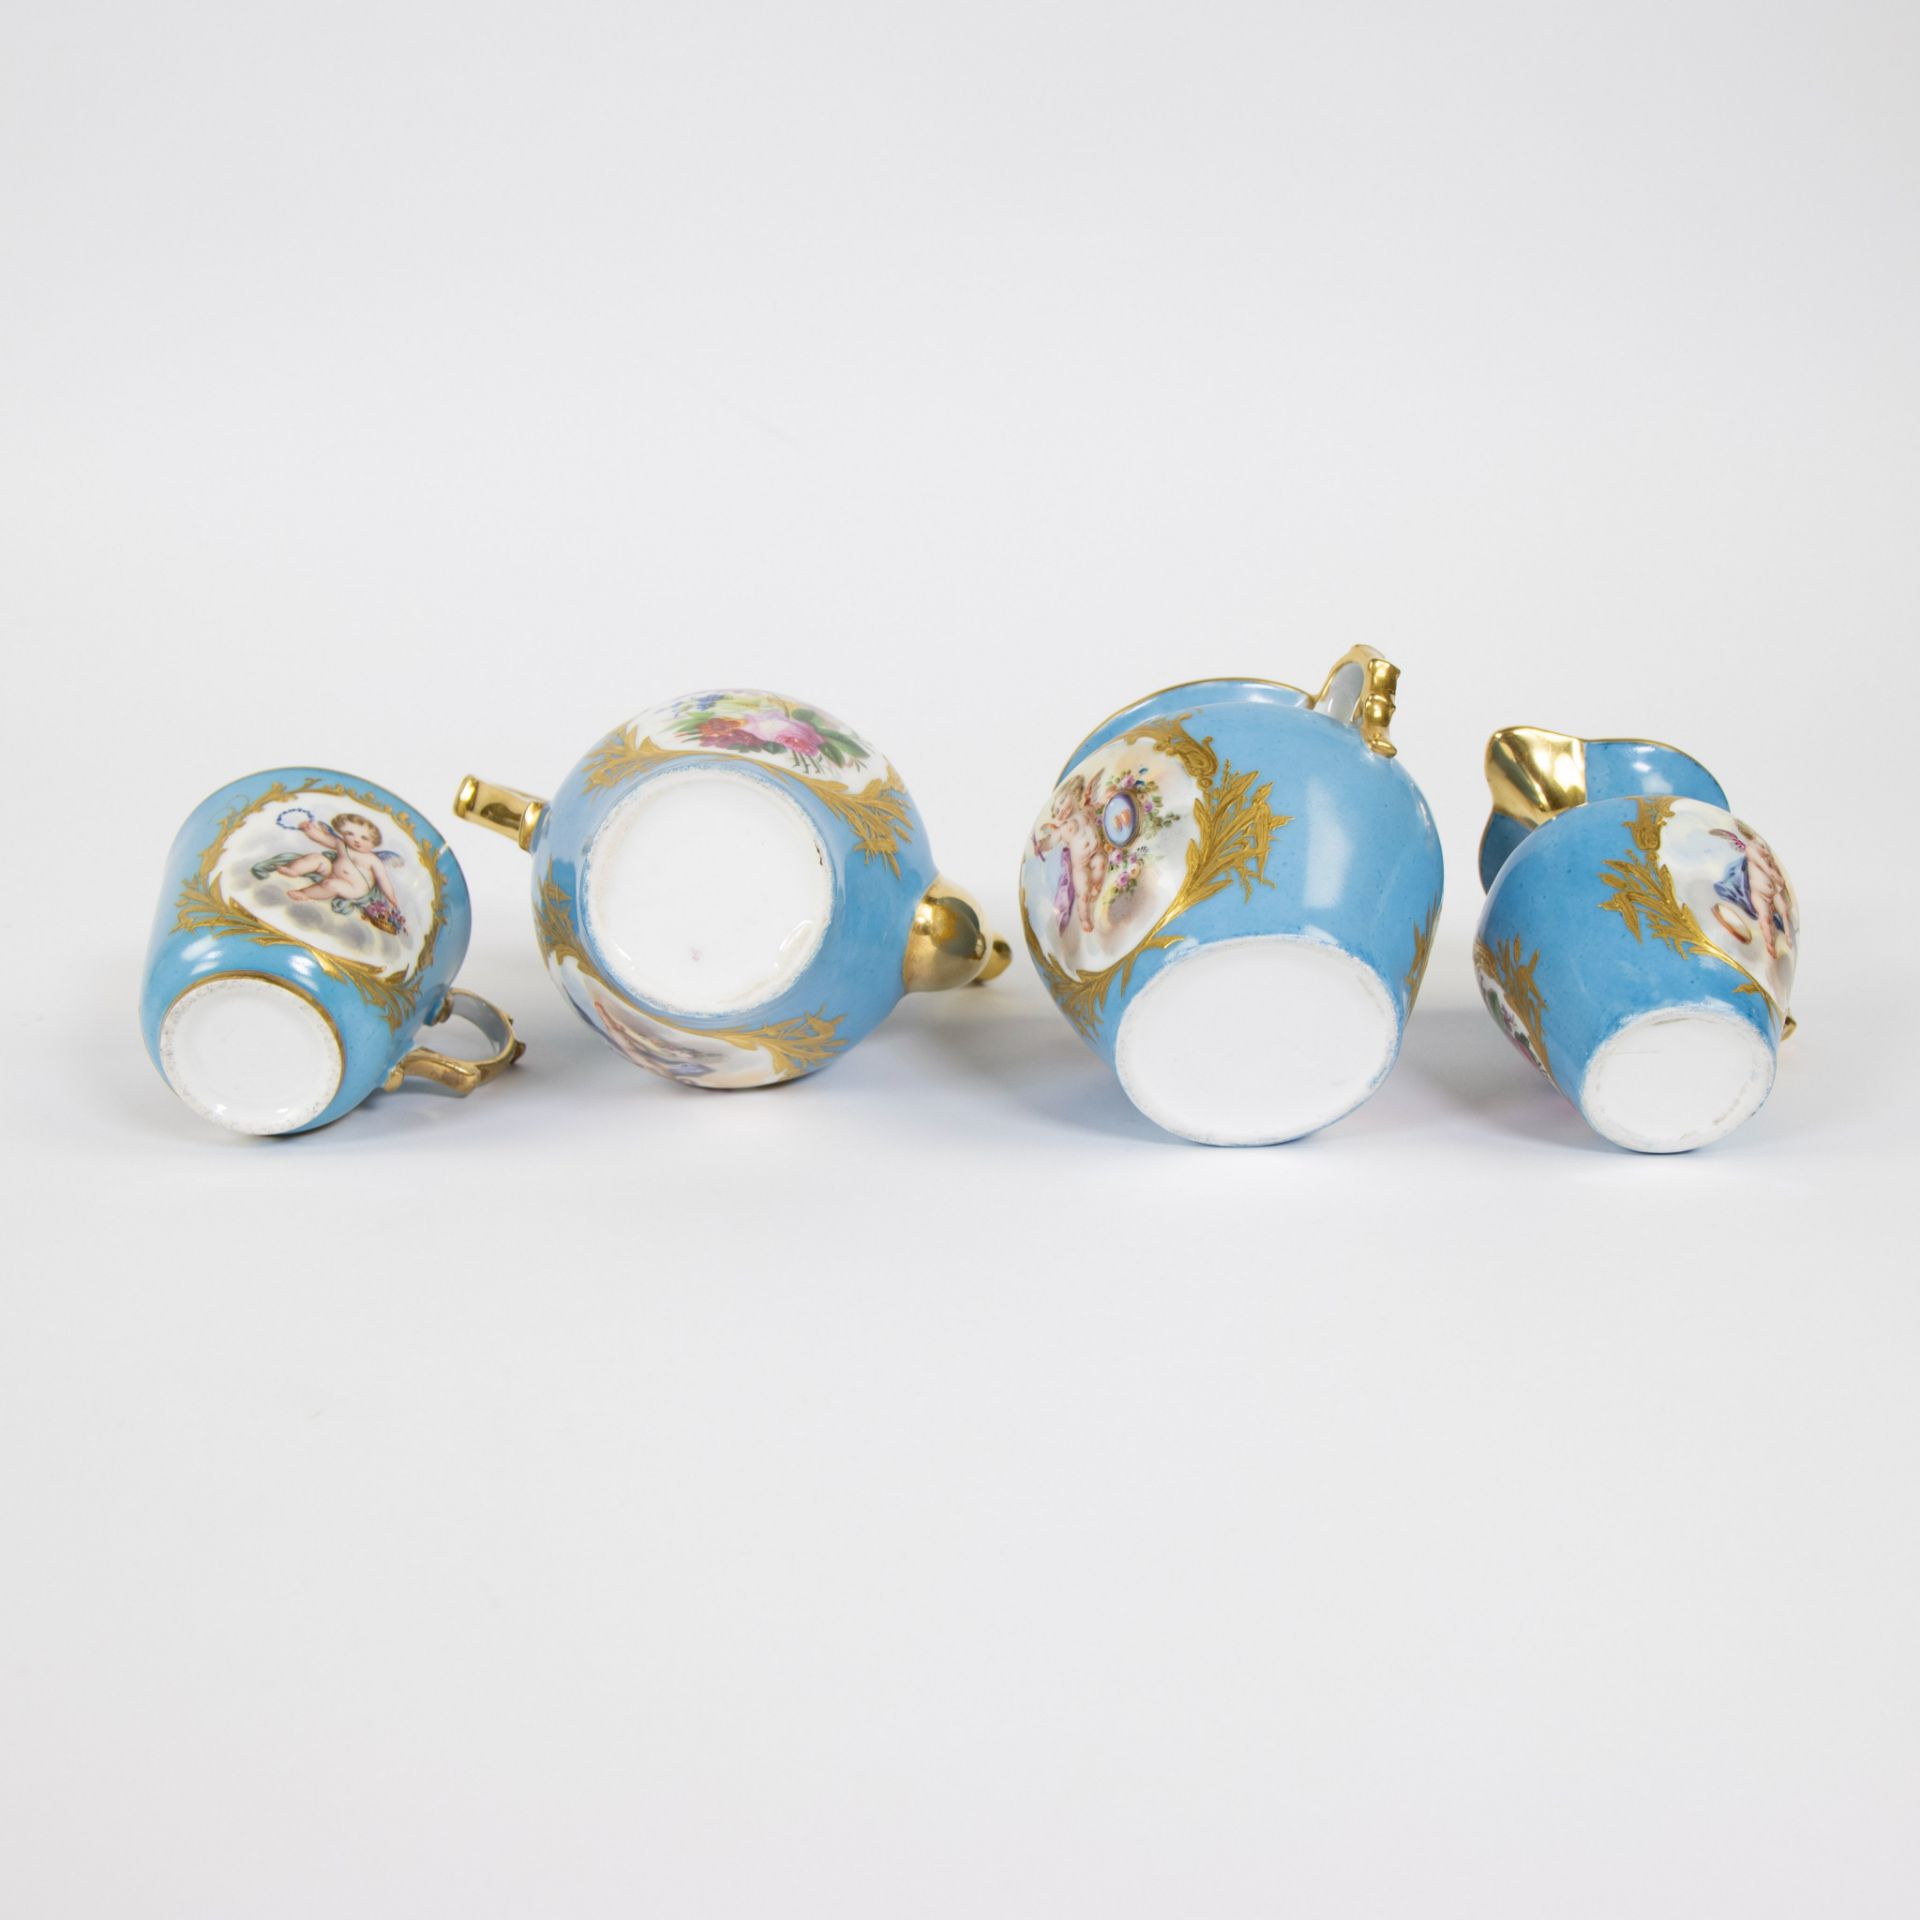 Mokka set solitaire or égoïste in porcelain decorated with cherubs and gold painting, Paris ca 1850 - Image 5 of 5